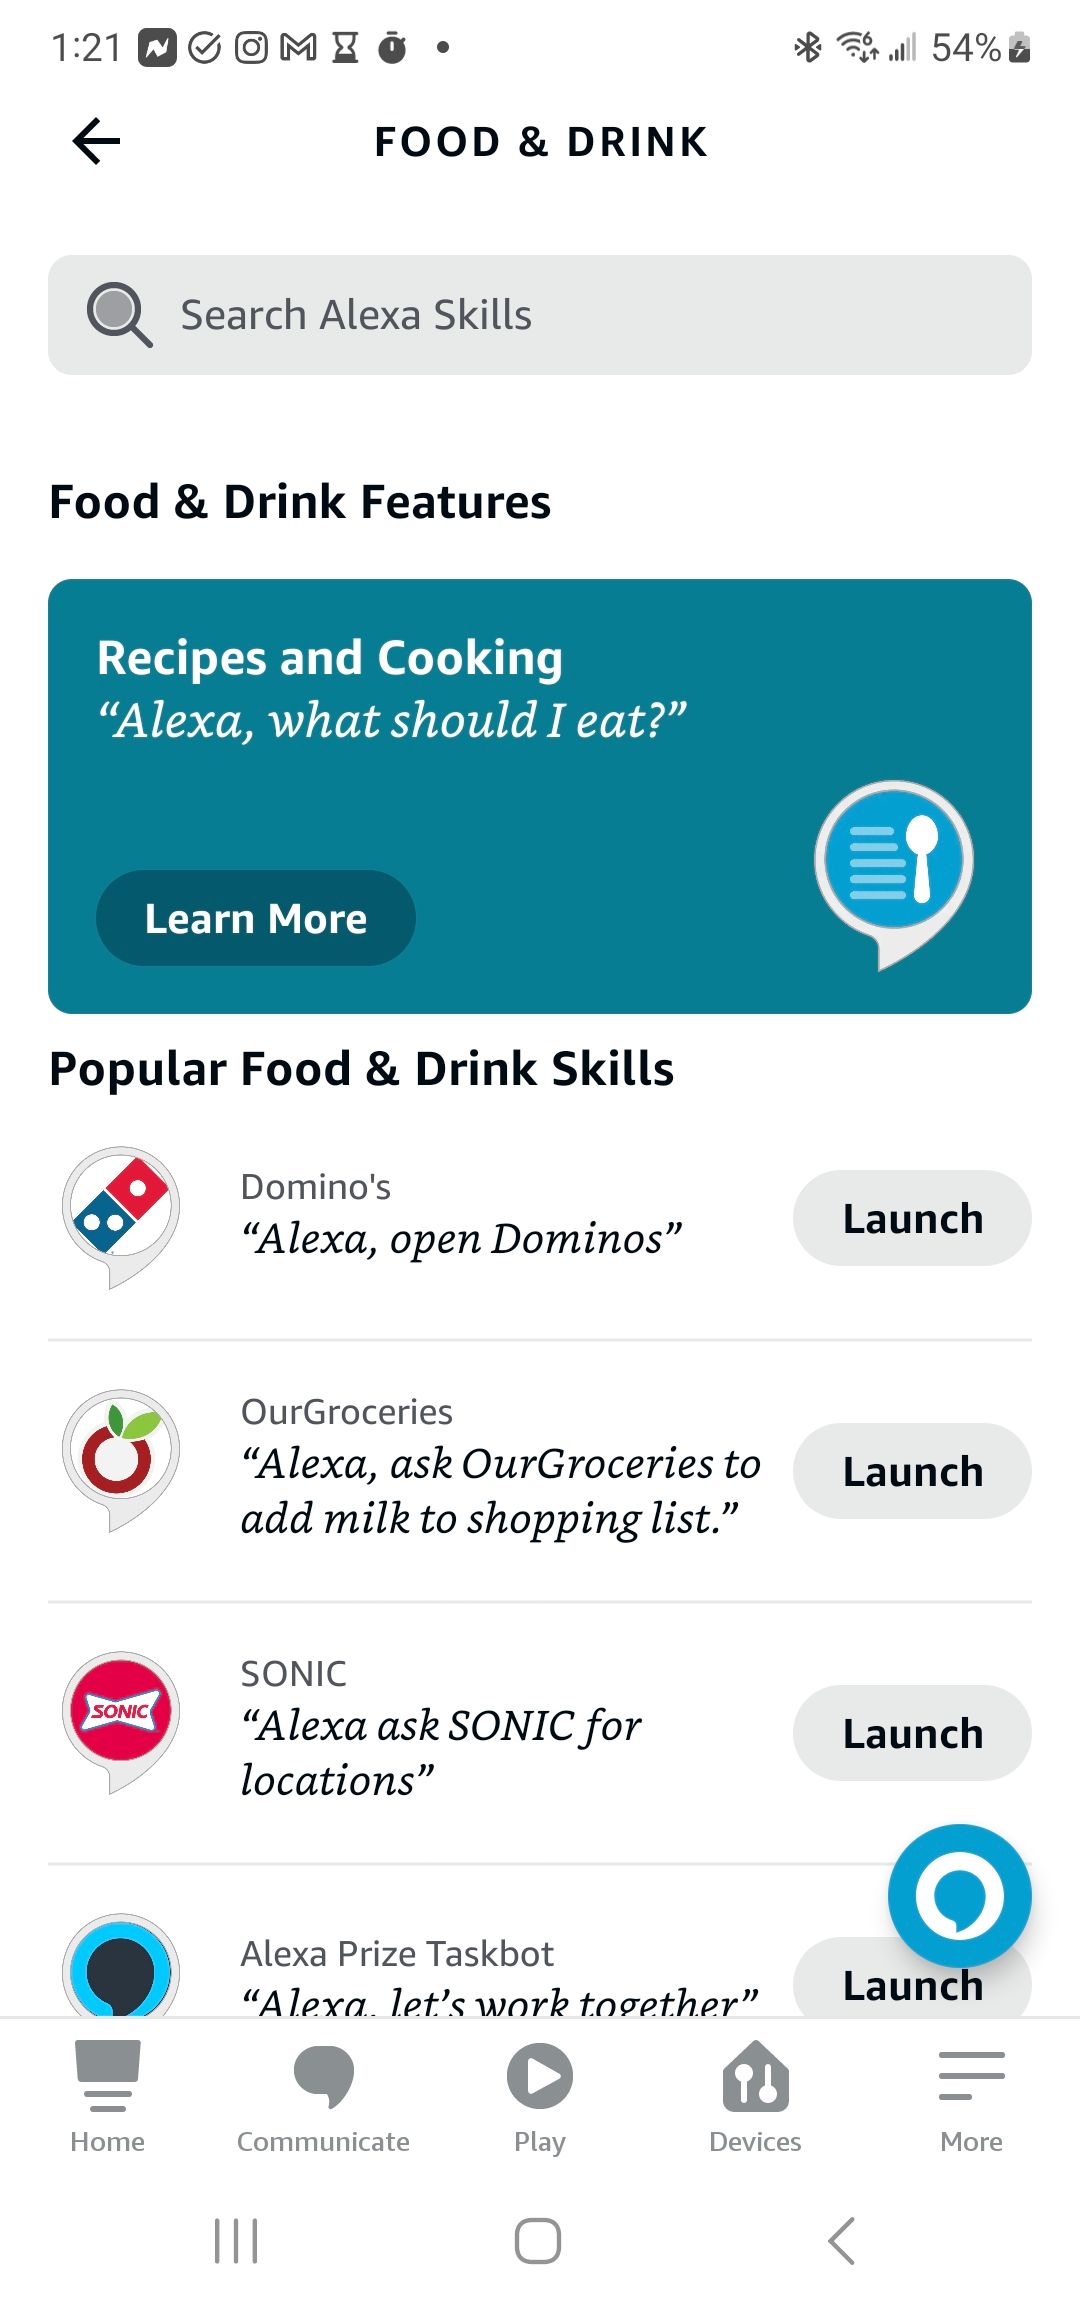 The Alexa app's "Food and Drink" features page.